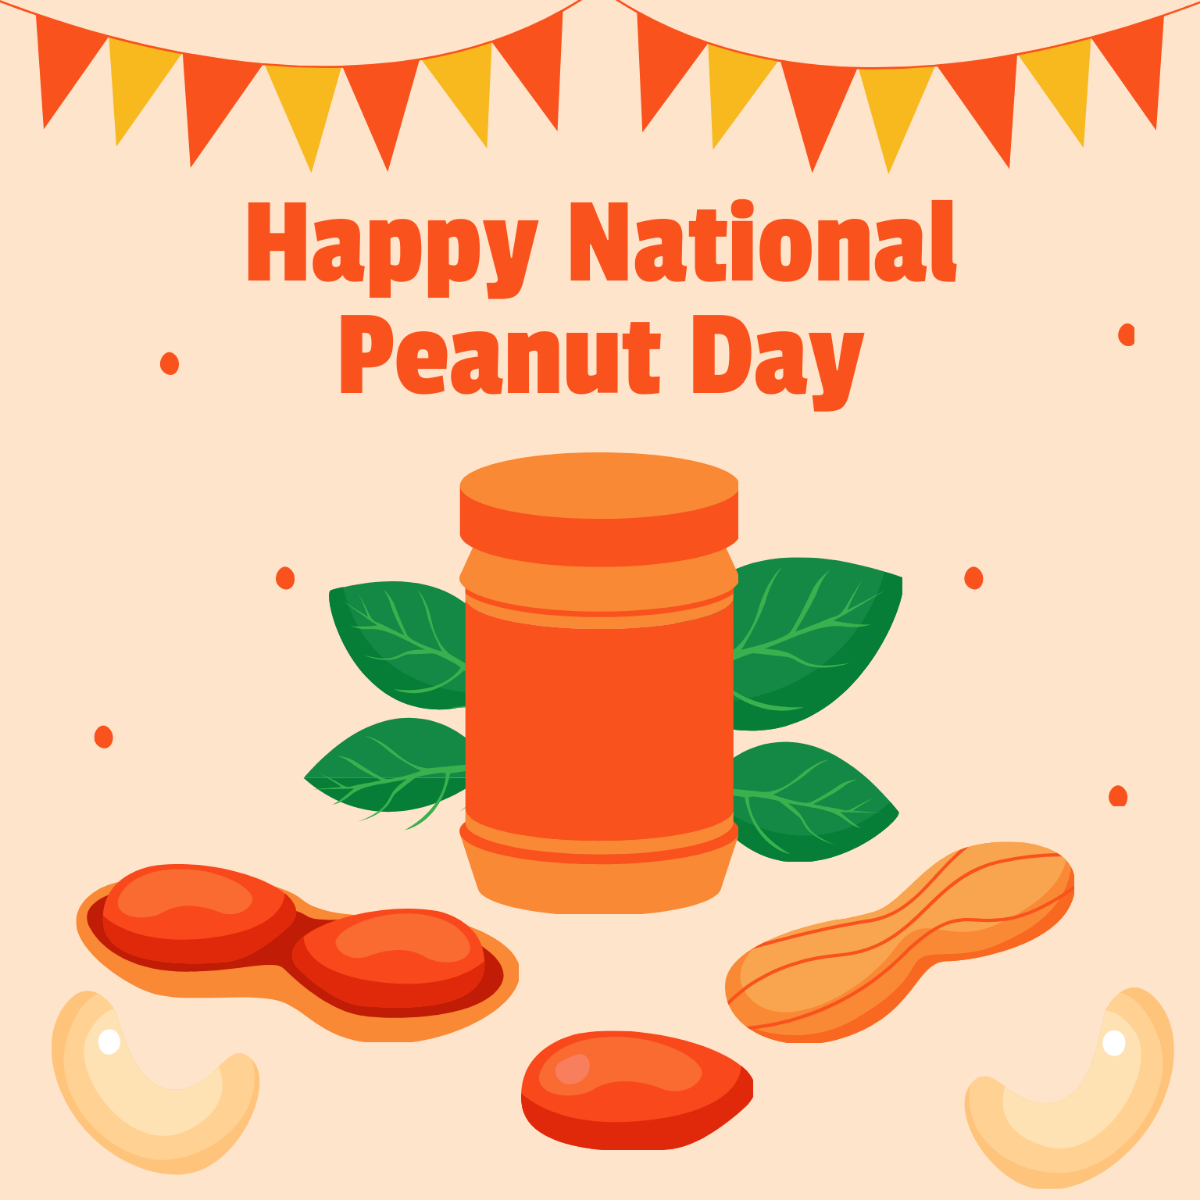 Free Happy National Peanut Day Illustration Template